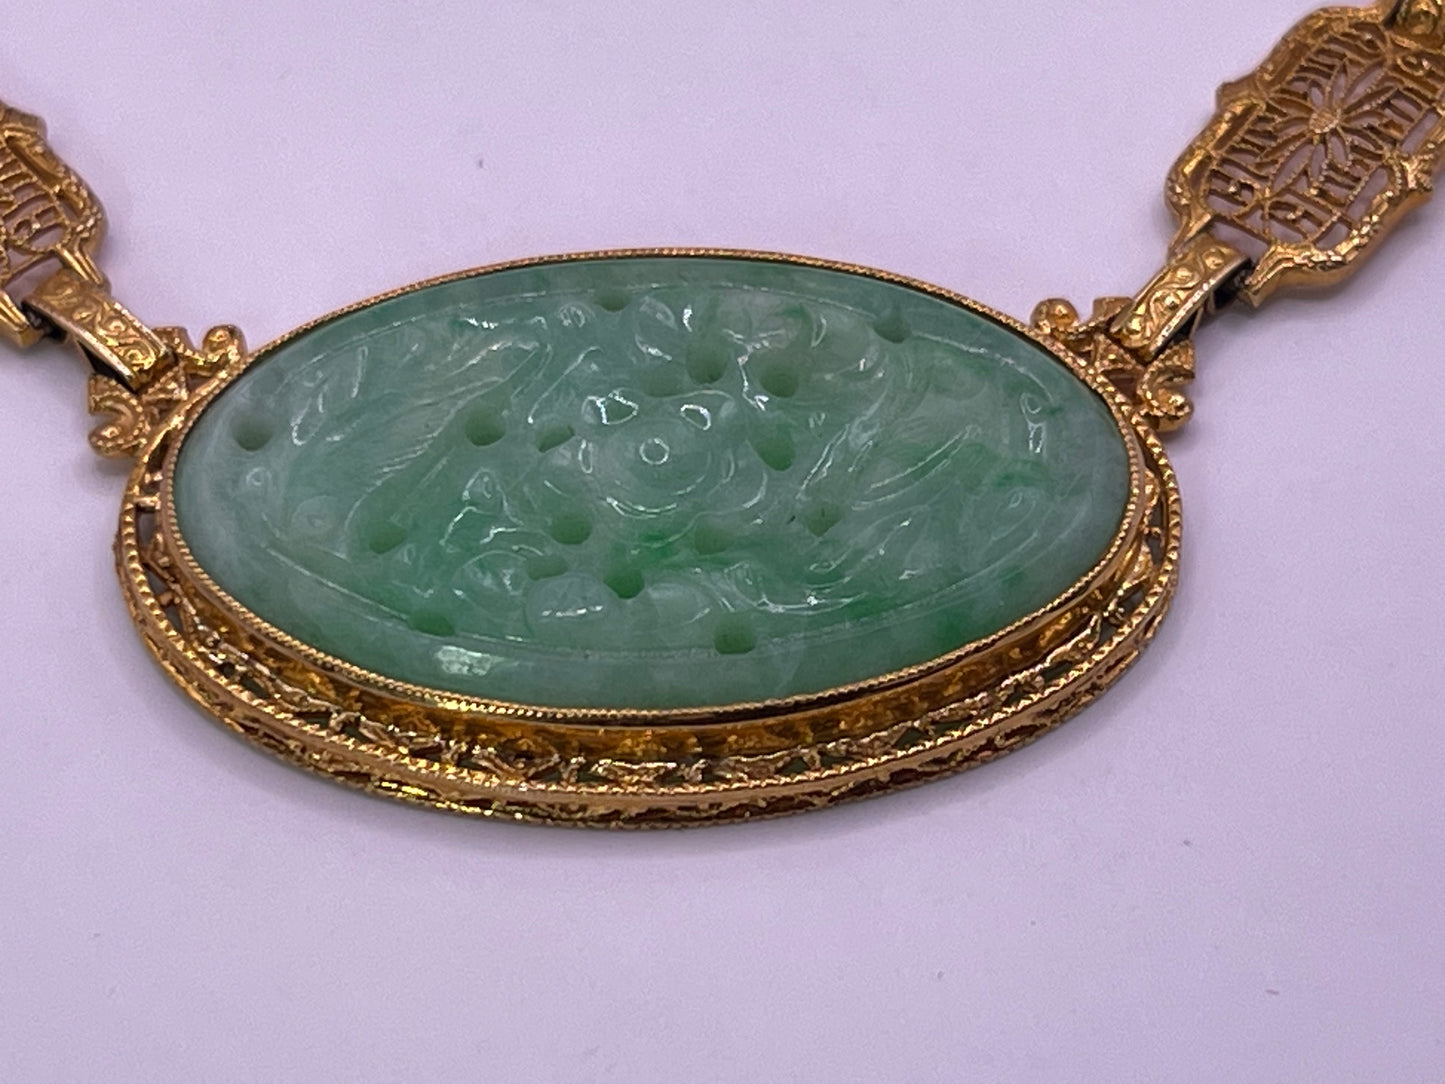 A vintage Art Deco style necklace with a antique apple green jade carved plaque in a 14kt filigree setting